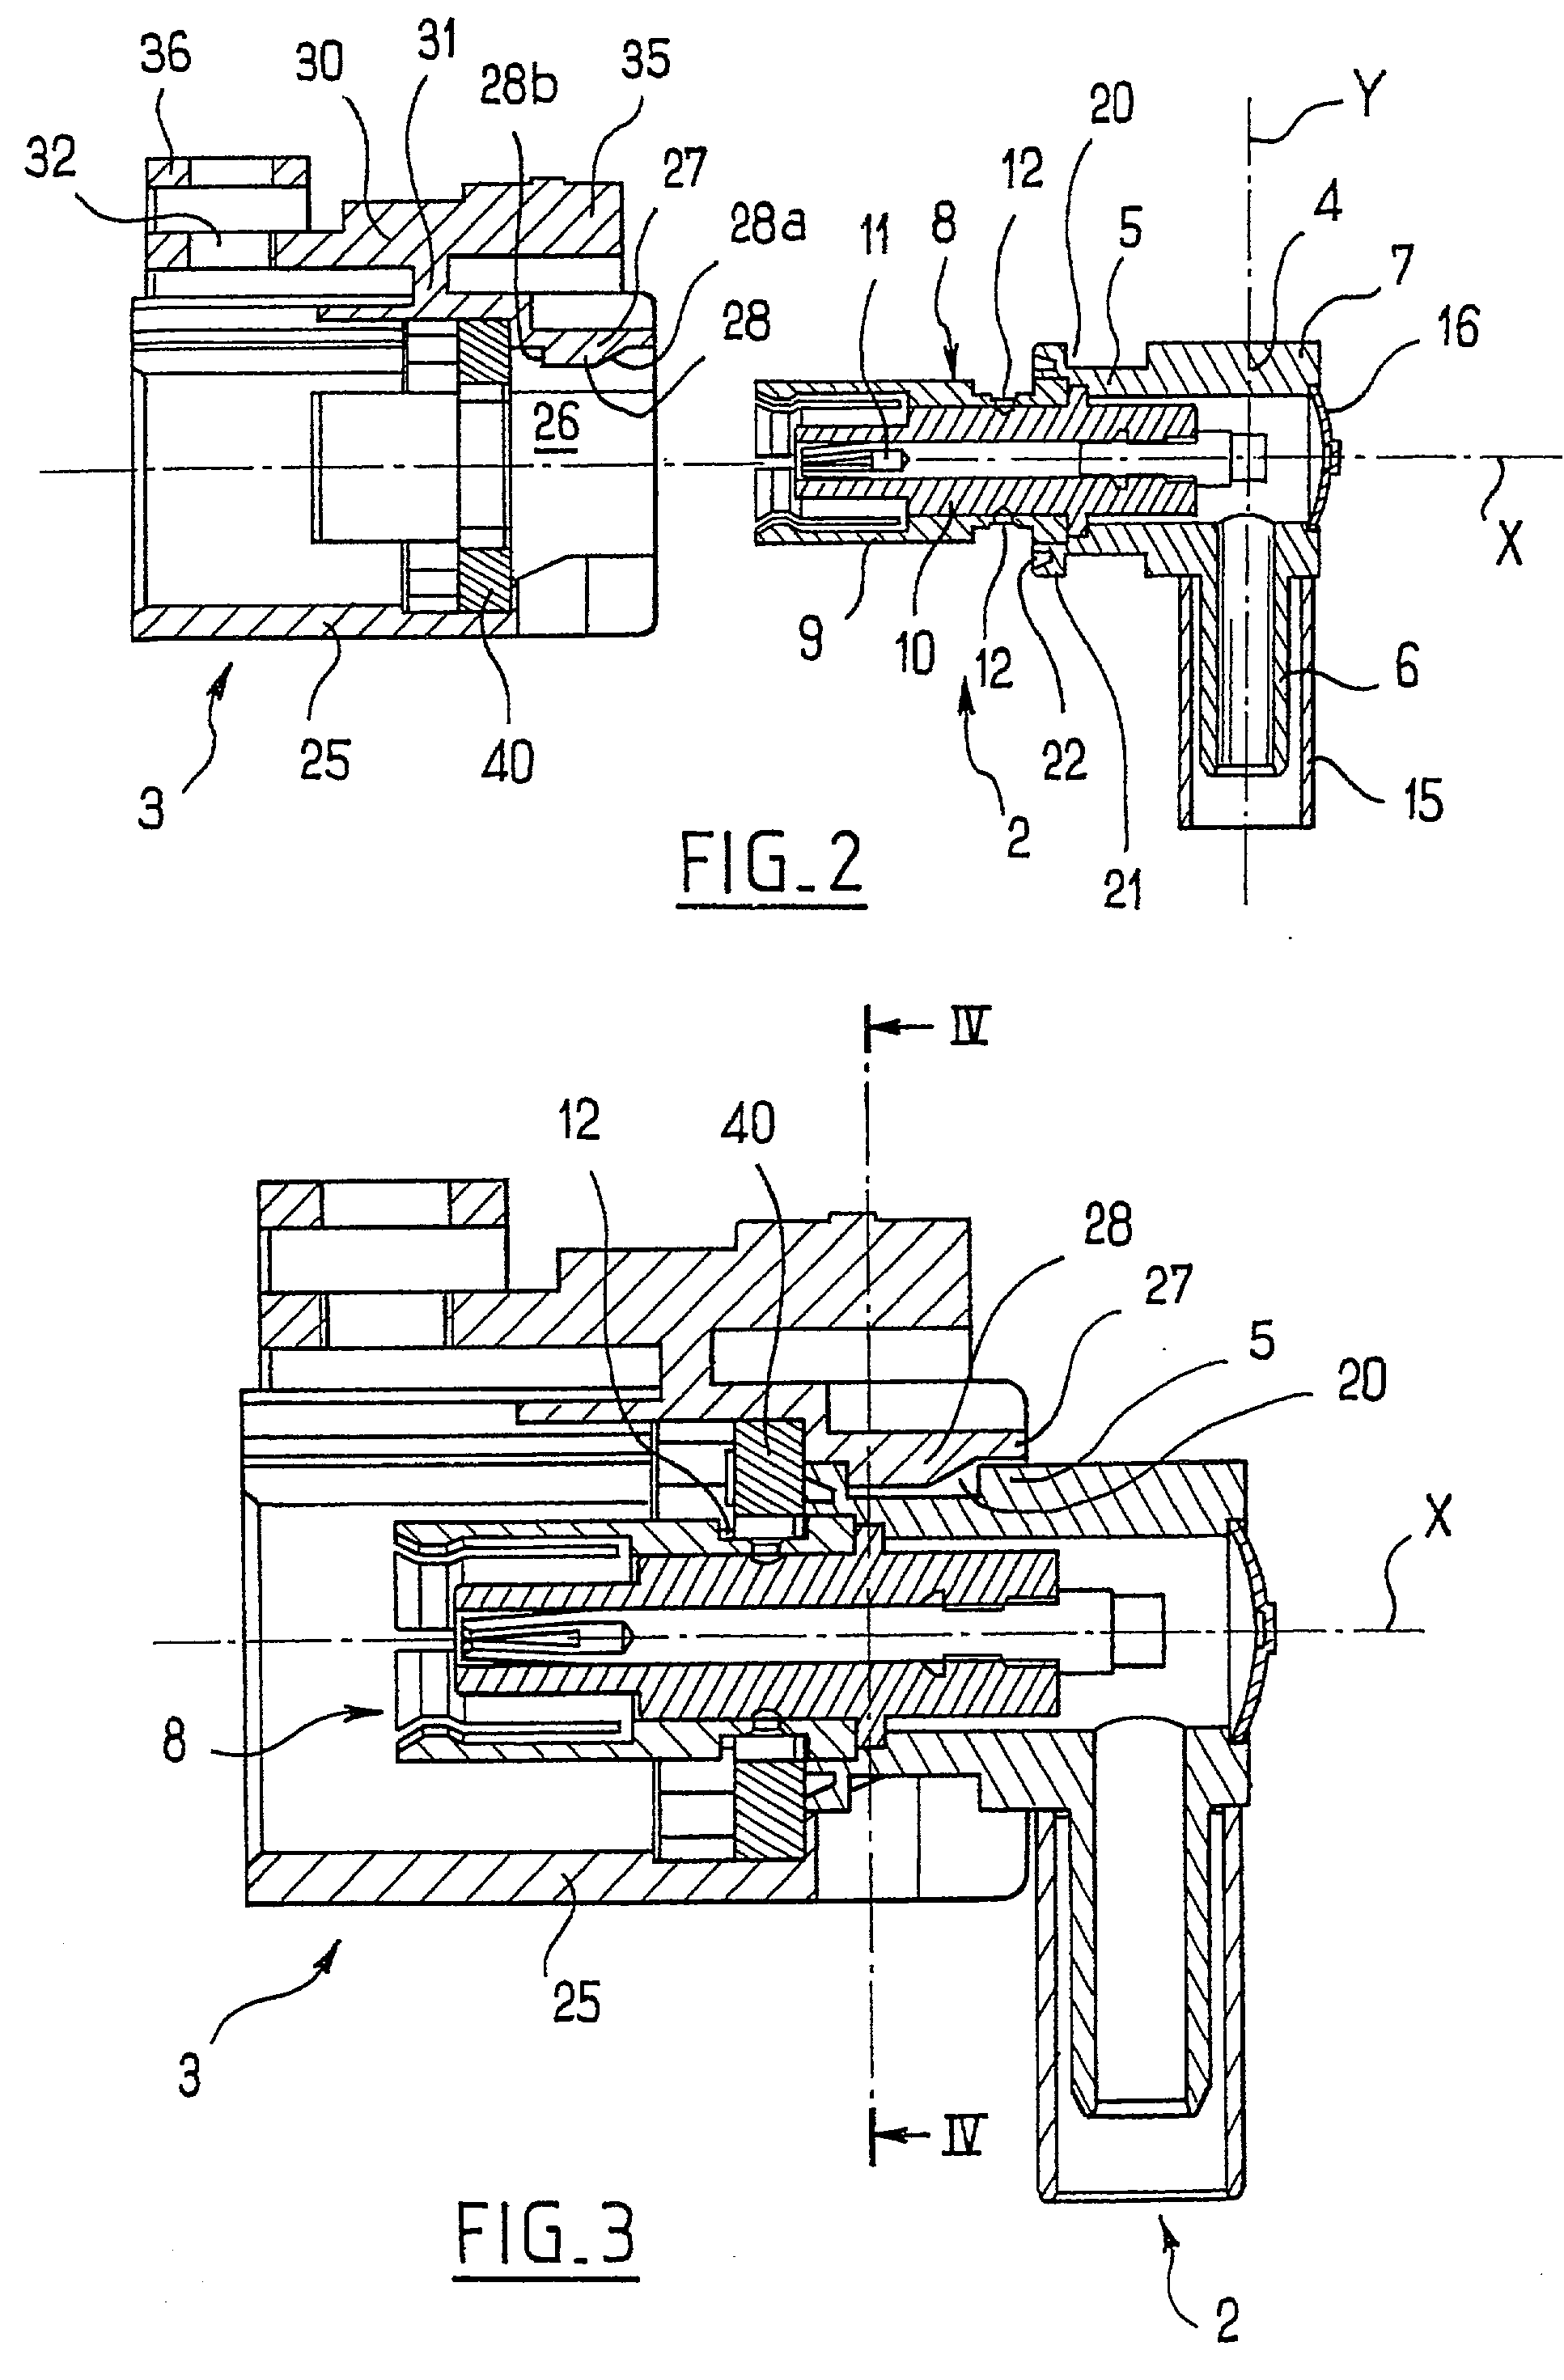 Angled coaxial electrical connector device